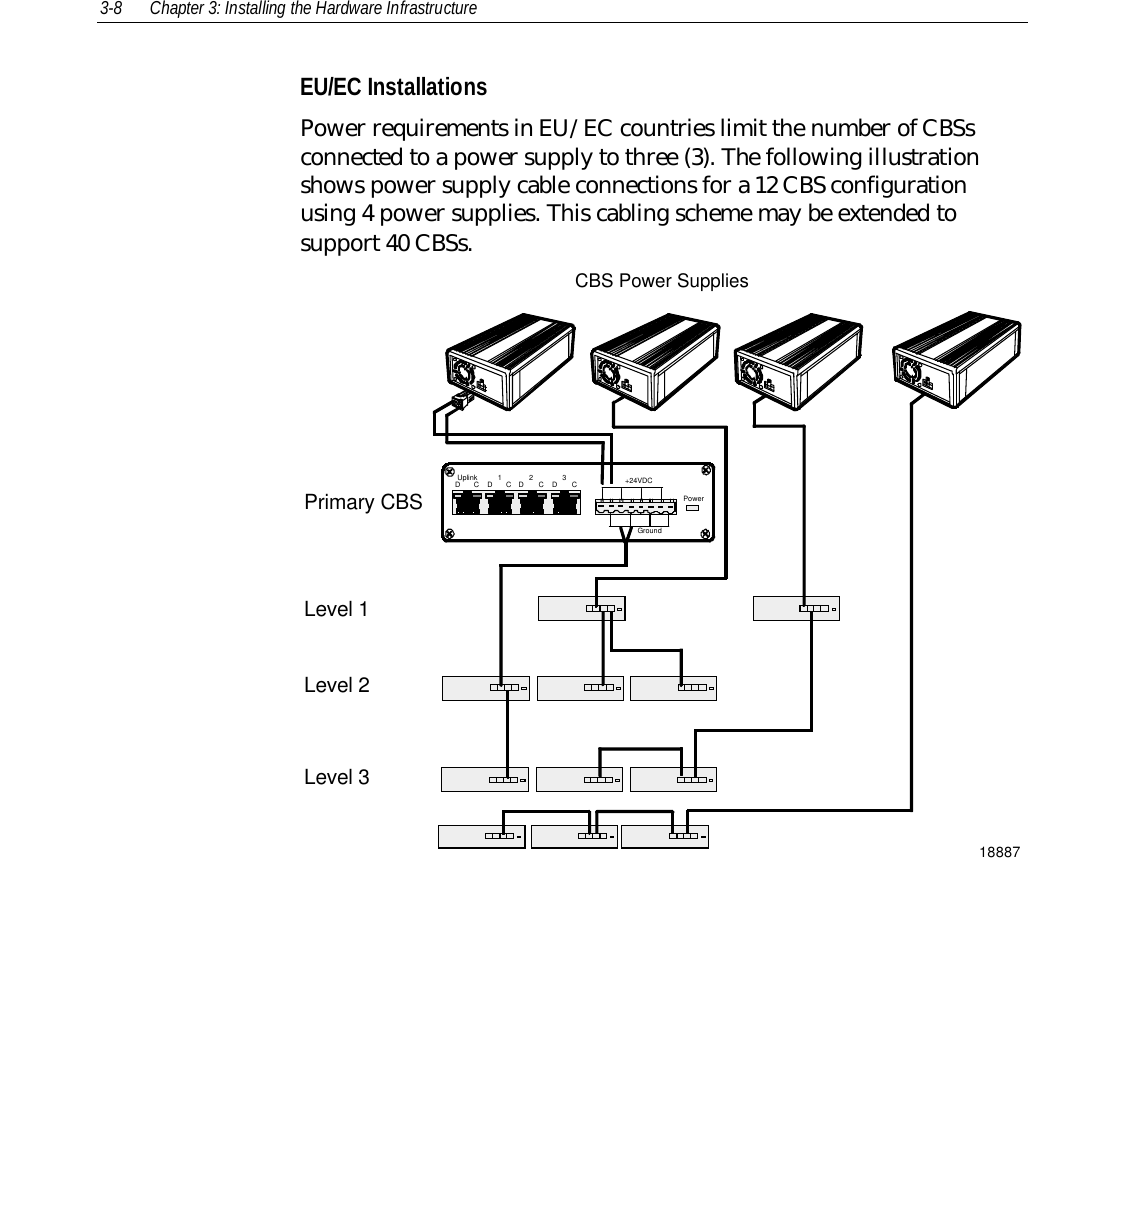 3-8 Chapter 3: Installing the Hardware InfrastructureEU/EC InstallationsPower requirements in EU/EC countries limit the number of CBSsconnected to a power supply to three (3). The following illustrationshows power supply cable connections for a 12 CBS configurationusing 4 power supplies. This cabling scheme may be extended tosupport 40 CBSs.18887Level 1Level 2Level 3Primary CBS PowerCBS Power Supplies+24VDCGroundUplinkDDD DCCCC12 3